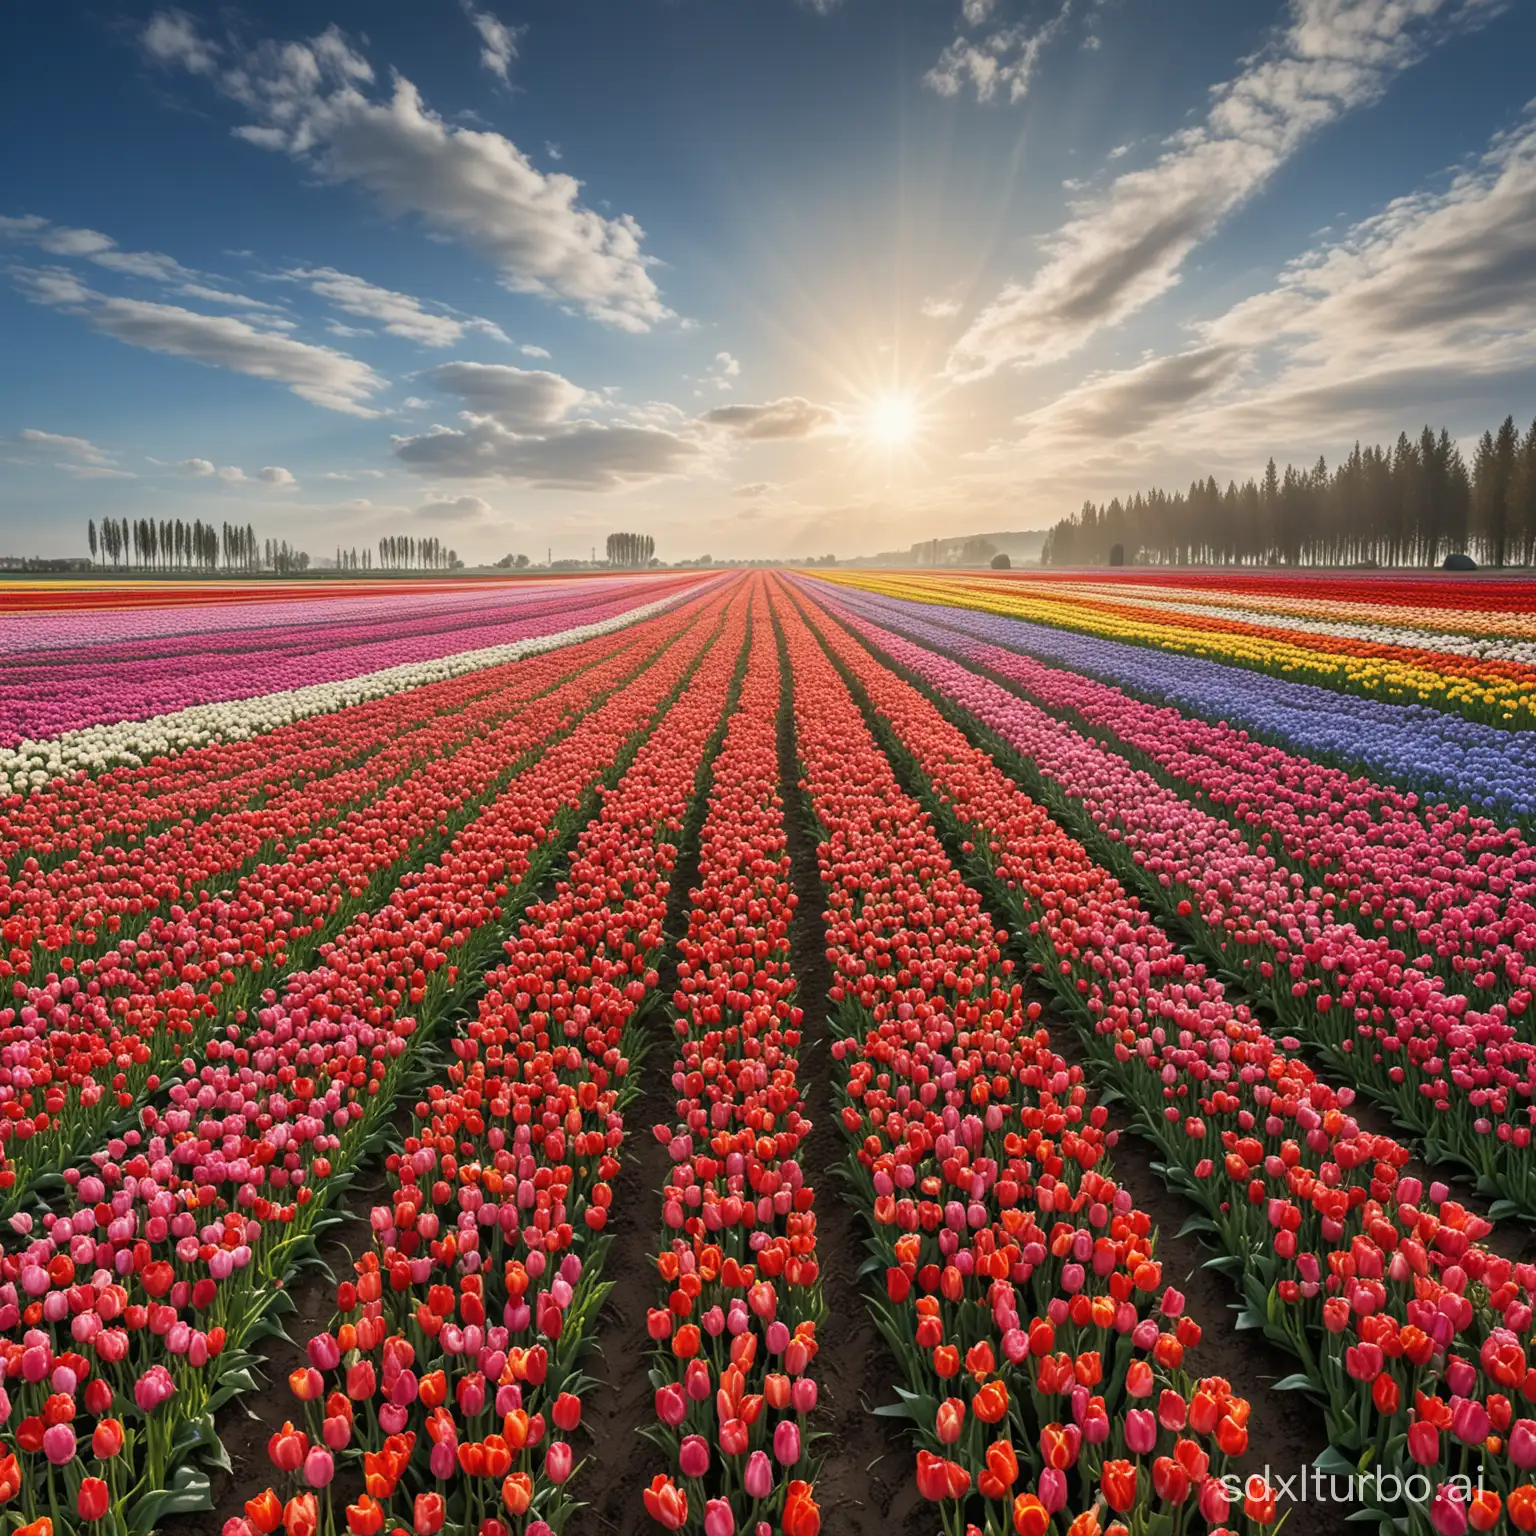 Of course! Here's the theme "A field of tulips in full spring" harmonized with the QUALIFIERS:

"Imagine a field of tulips in full spring, with endless rows of colorful flowers in vibrant hues, creating a floral carpet stretching to the horizon under a clear blue sky, captured with the following QUALIFIERS: (((Best quality))), (((Best focus))), (((Best angle))), (((Best lighting))), (((Intricate details))), (((Harmonious scenery))), (((Best composition))), (((Richness of details)))."